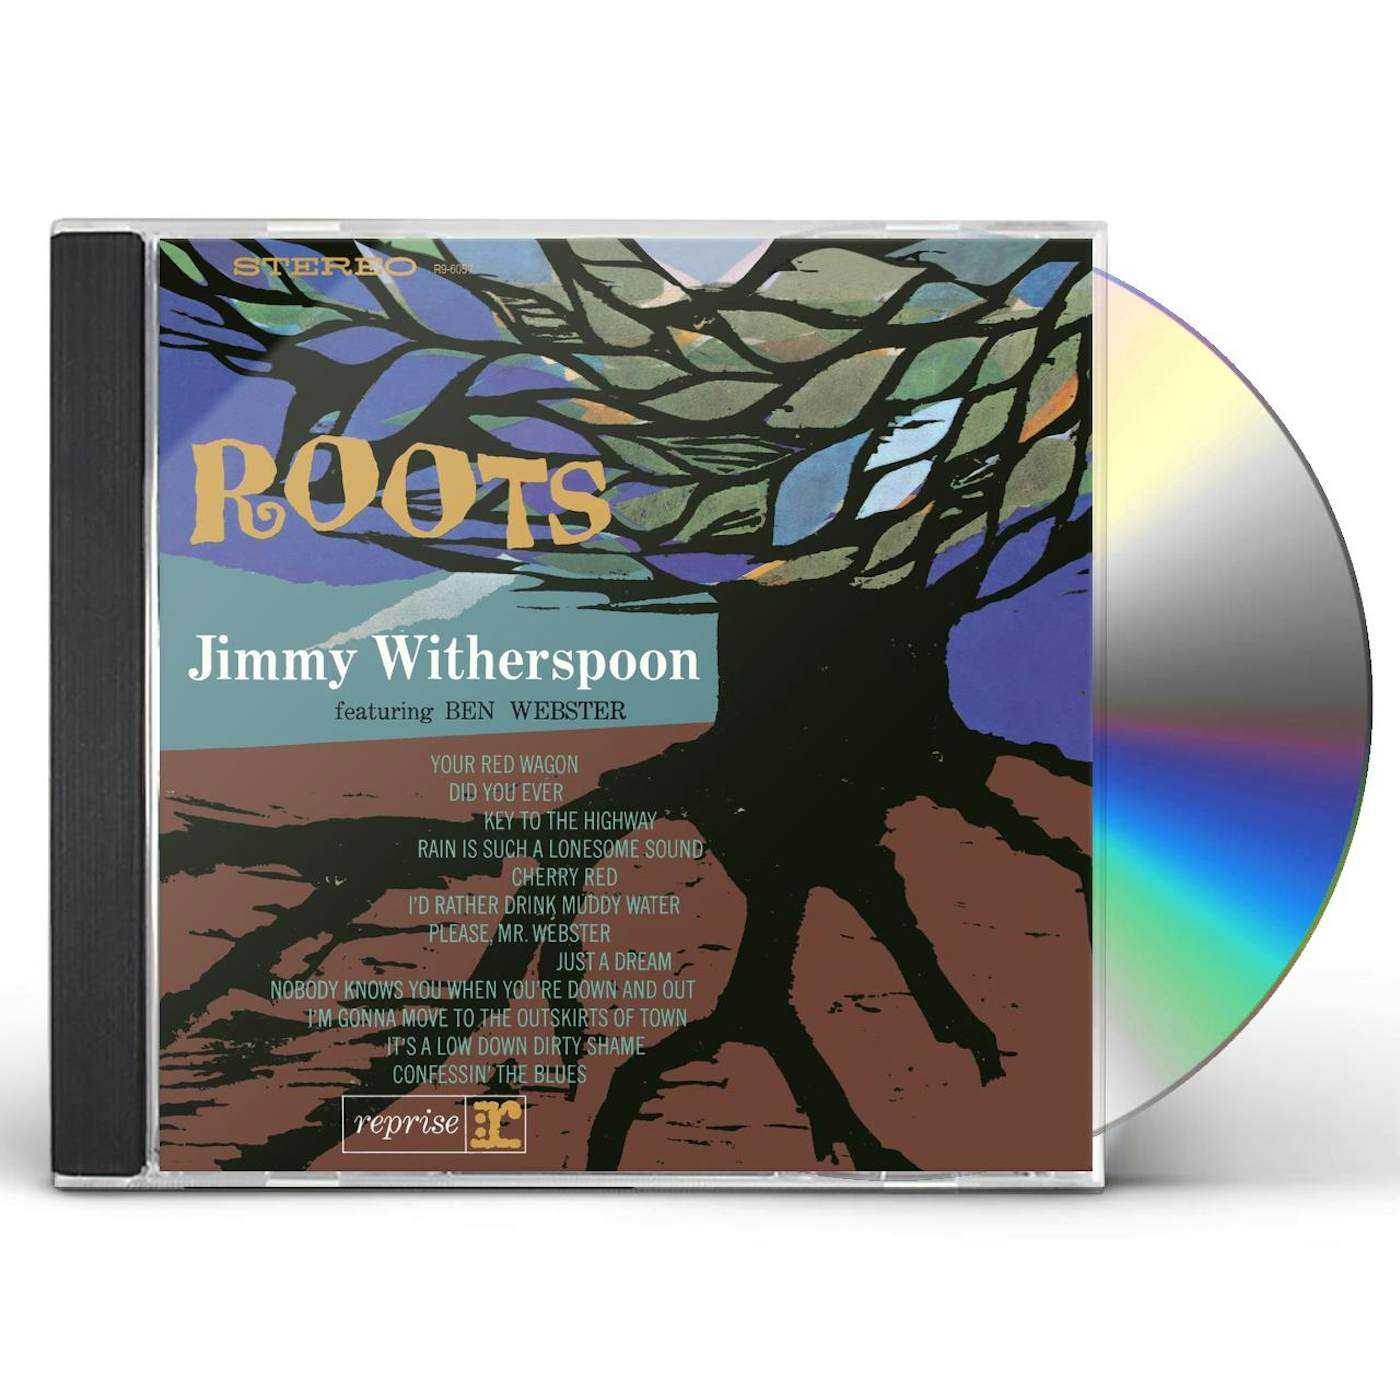 Jimmy Witherspoon ROOTS CD